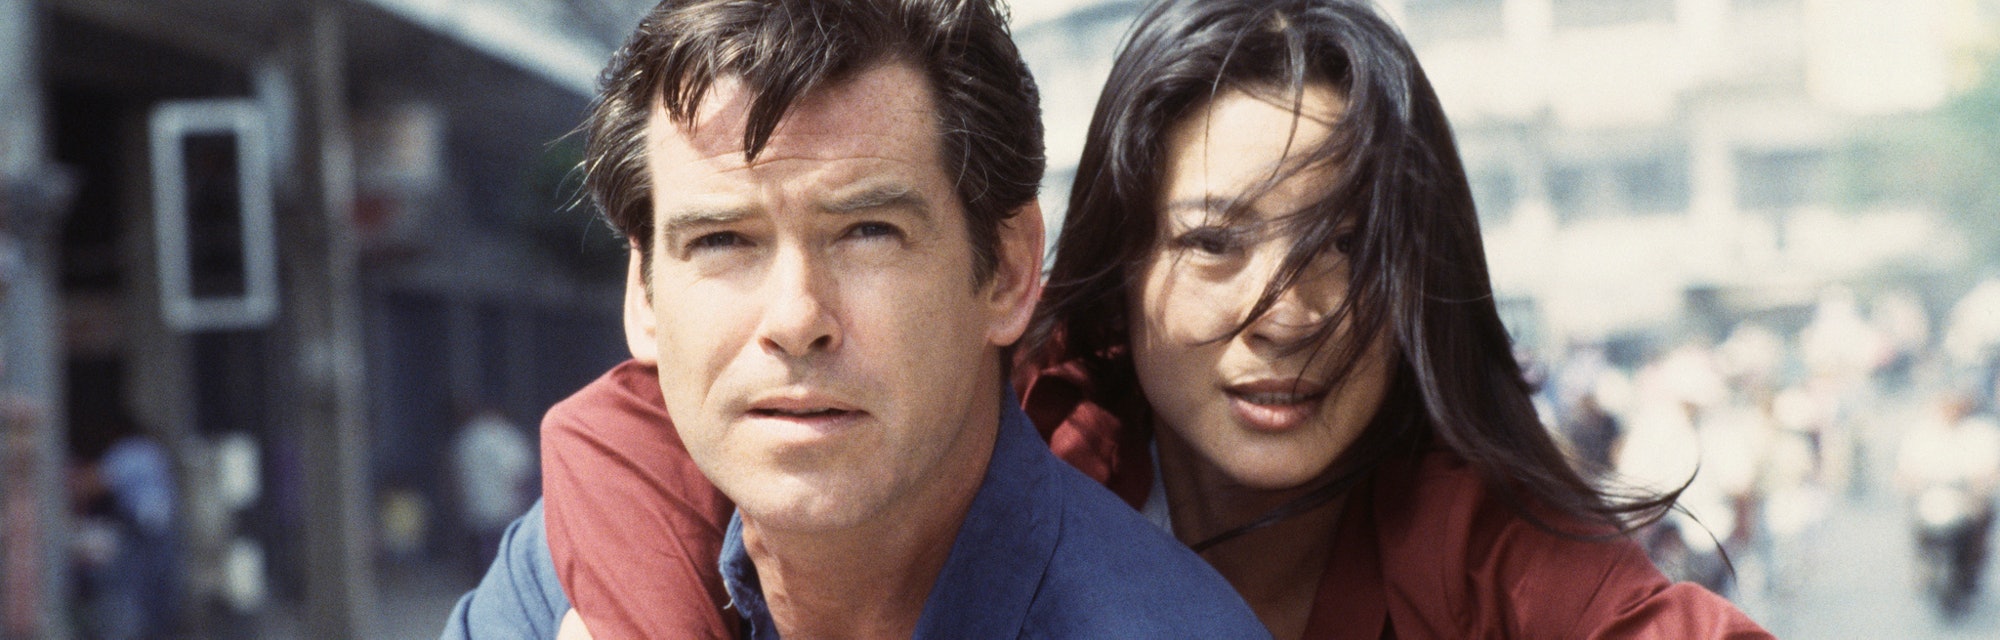 Pierce Brosnan as James Bond and Michelle Yeoh as Wai Lin in MGM's Tomorrow Never Dies